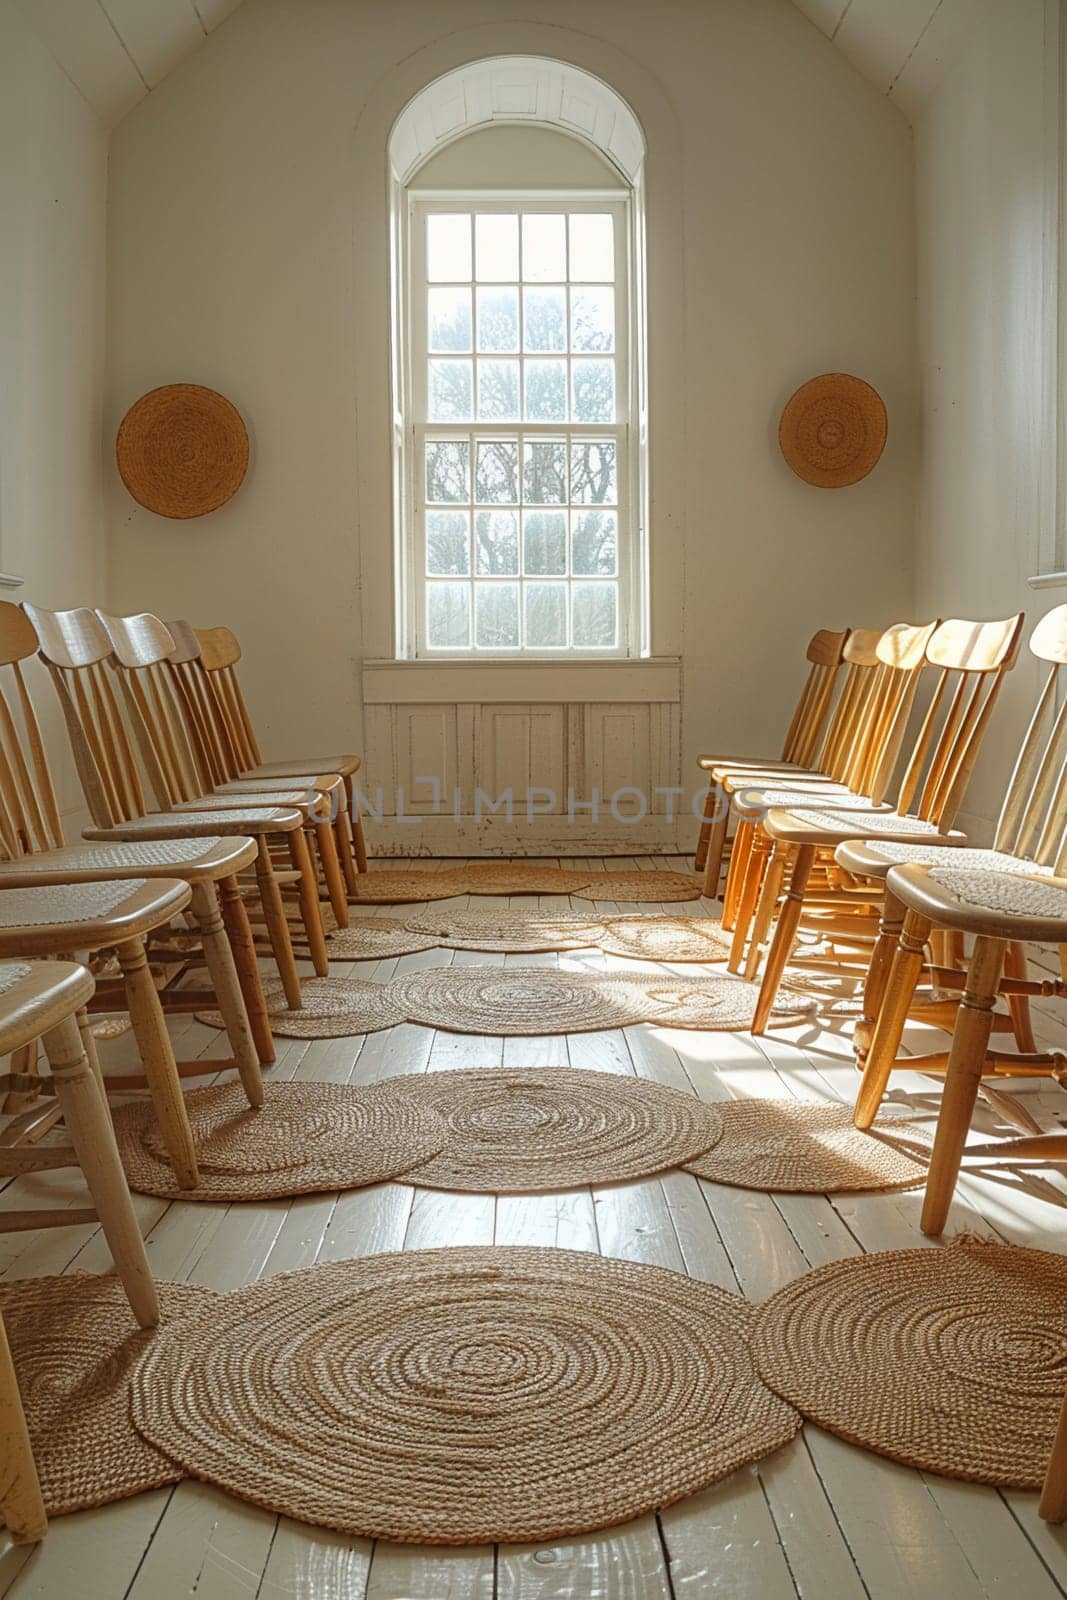 Quaker Simplicity in a Plain Meeting Room, The room's sparse furnishings blur into a space of peace and silent reflection.